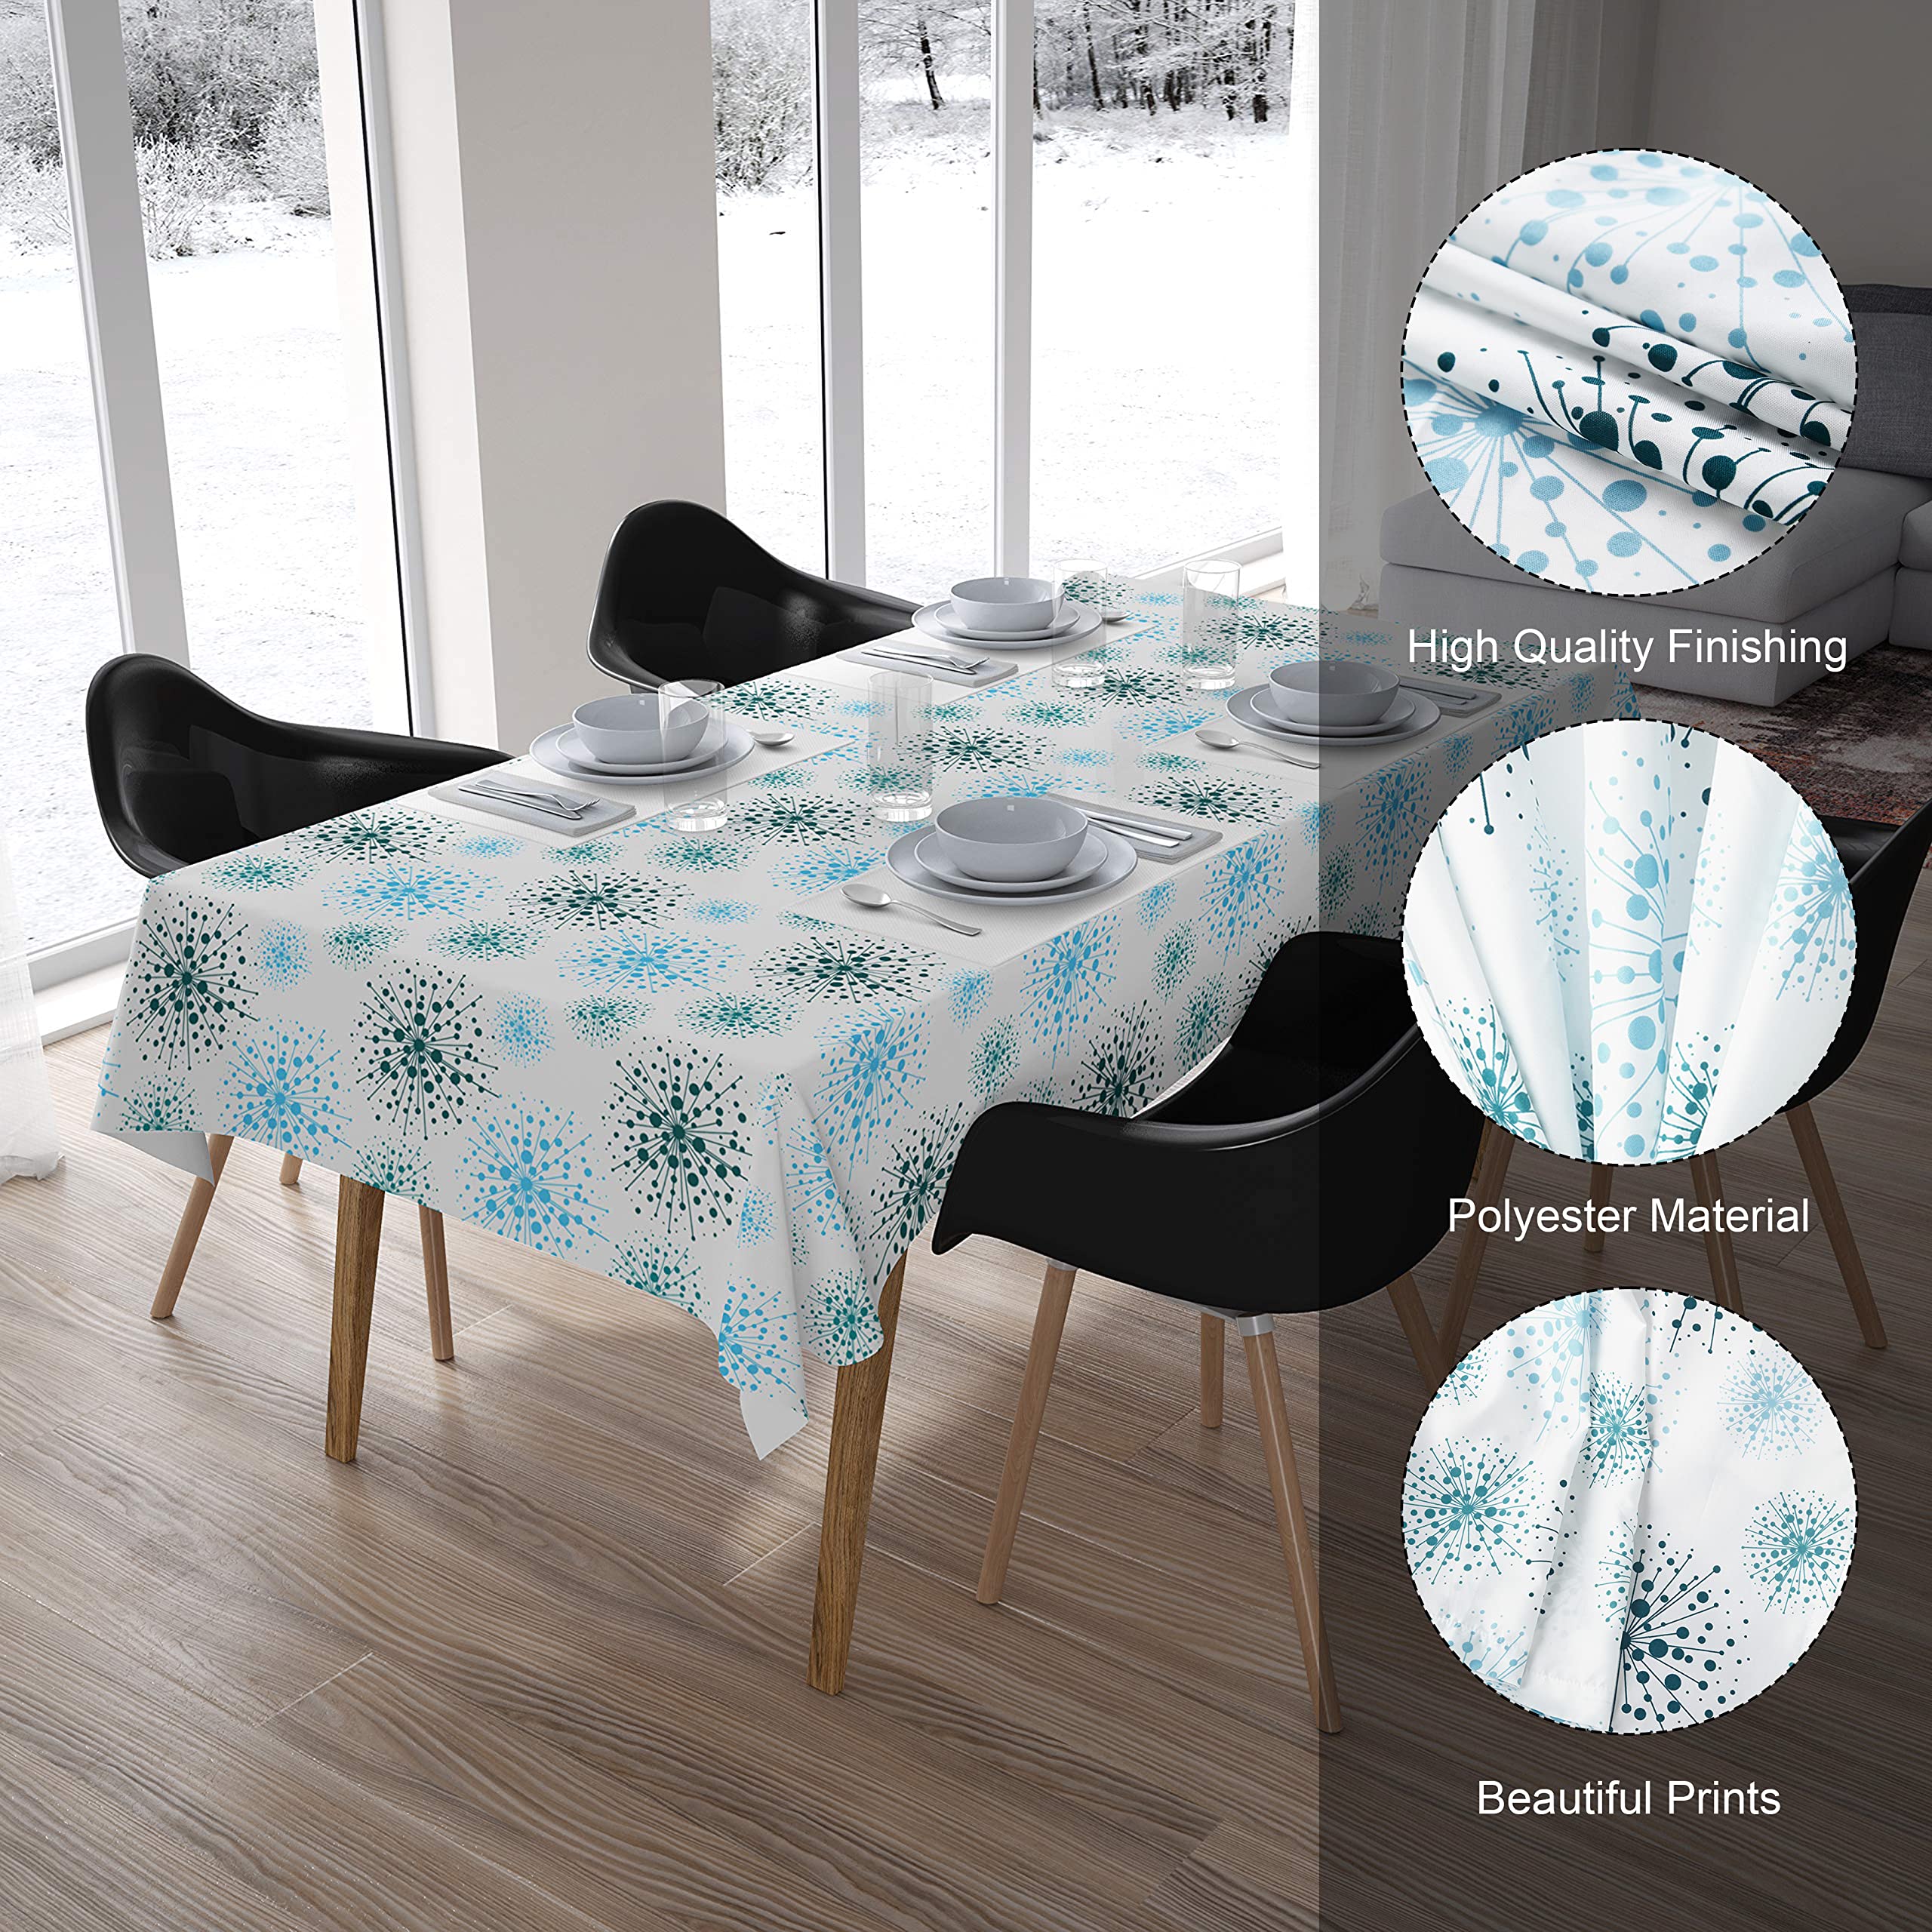 Encasa Homes Printed Table Cloth 6 ft for 4 to 6 Seater Dining Table, 100% Silky Polyester, Machine Wash to Remove Food Stains, Non-Fading, Non-Shrinking, Cheap & Durable - Blowball